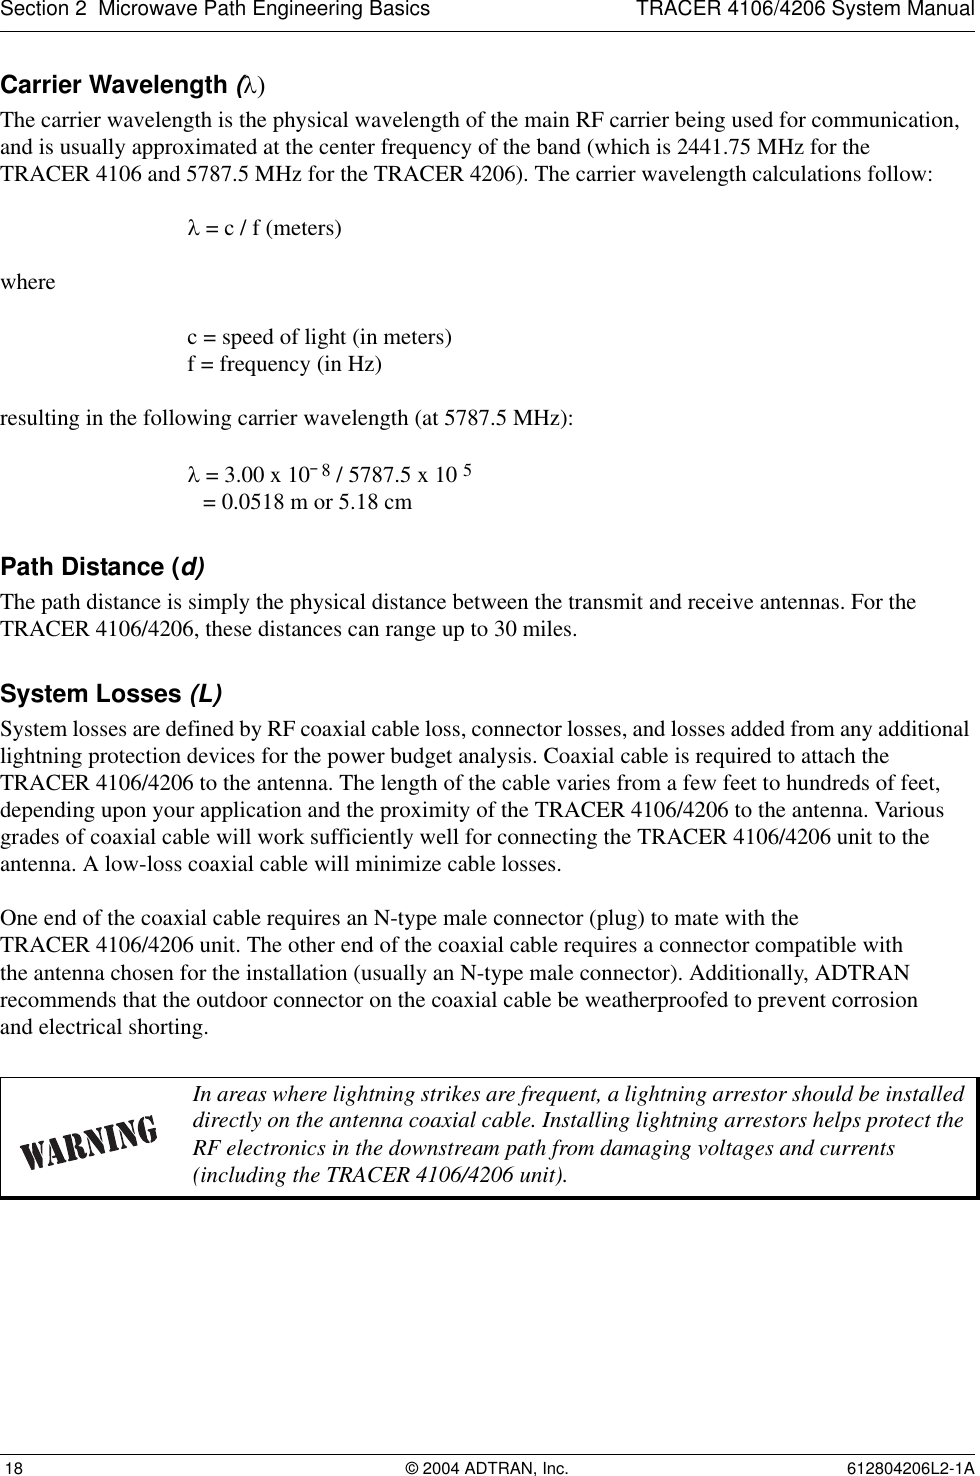 Section 2  Microwave Path Engineering Basics TRACER 4106/4206 System Manual 18 © 2004 ADTRAN, Inc. 612804206L2-1ACarrier Wavelength (λ)The carrier wavelength is the physical wavelength of the main RF carrier being used for communication, and is usually approximated at the center frequency of the band (which is 2441.75 MHz for theTRACER 4106 and 5787.5 MHz for the TRACER 4206). The carrier wavelength calculations follow:λ = c / f (meters)where c = speed of light (in meters)f = frequency (in Hz)resulting in the following carrier wavelength (at 5787.5 MHz):λ = 3.00 x 10¯8 / 5787.5 x 10 5 = 0.0518 m or 5.18 cmPath Distance (d)The path distance is simply the physical distance between the transmit and receive antennas. For the TRACER 4106/4206, these distances can range up to 30 miles. System Losses (L)System losses are defined by RF coaxial cable loss, connector losses, and losses added from any additional lightning protection devices for the power budget analysis. Coaxial cable is required to attach the TRACER 4106/4206 to the antenna. The length of the cable varies from a few feet to hundreds of feet, depending upon your application and the proximity of the TRACER 4106/4206 to the antenna. Various grades of coaxial cable will work sufficiently well for connecting the TRACER 4106/4206 unit to the antenna. A low-loss coaxial cable will minimize cable losses.One end of the coaxial cable requires an N-type male connector (plug) to mate with theTRACER 4106/4206 unit. The other end of the coaxial cable requires a connector compatible withthe antenna chosen for the installation (usually an N-type male connector). Additionally, ADTRAN recommends that the outdoor connector on the coaxial cable be weatherproofed to prevent corrosionand electrical shorting.In areas where lightning strikes are frequent, a lightning arrestor should be installed directly on the antenna coaxial cable. Installing lightning arrestors helps protect the RF electronics in the downstream path from damaging voltages and currents (including the TRACER 4106/4206 unit).